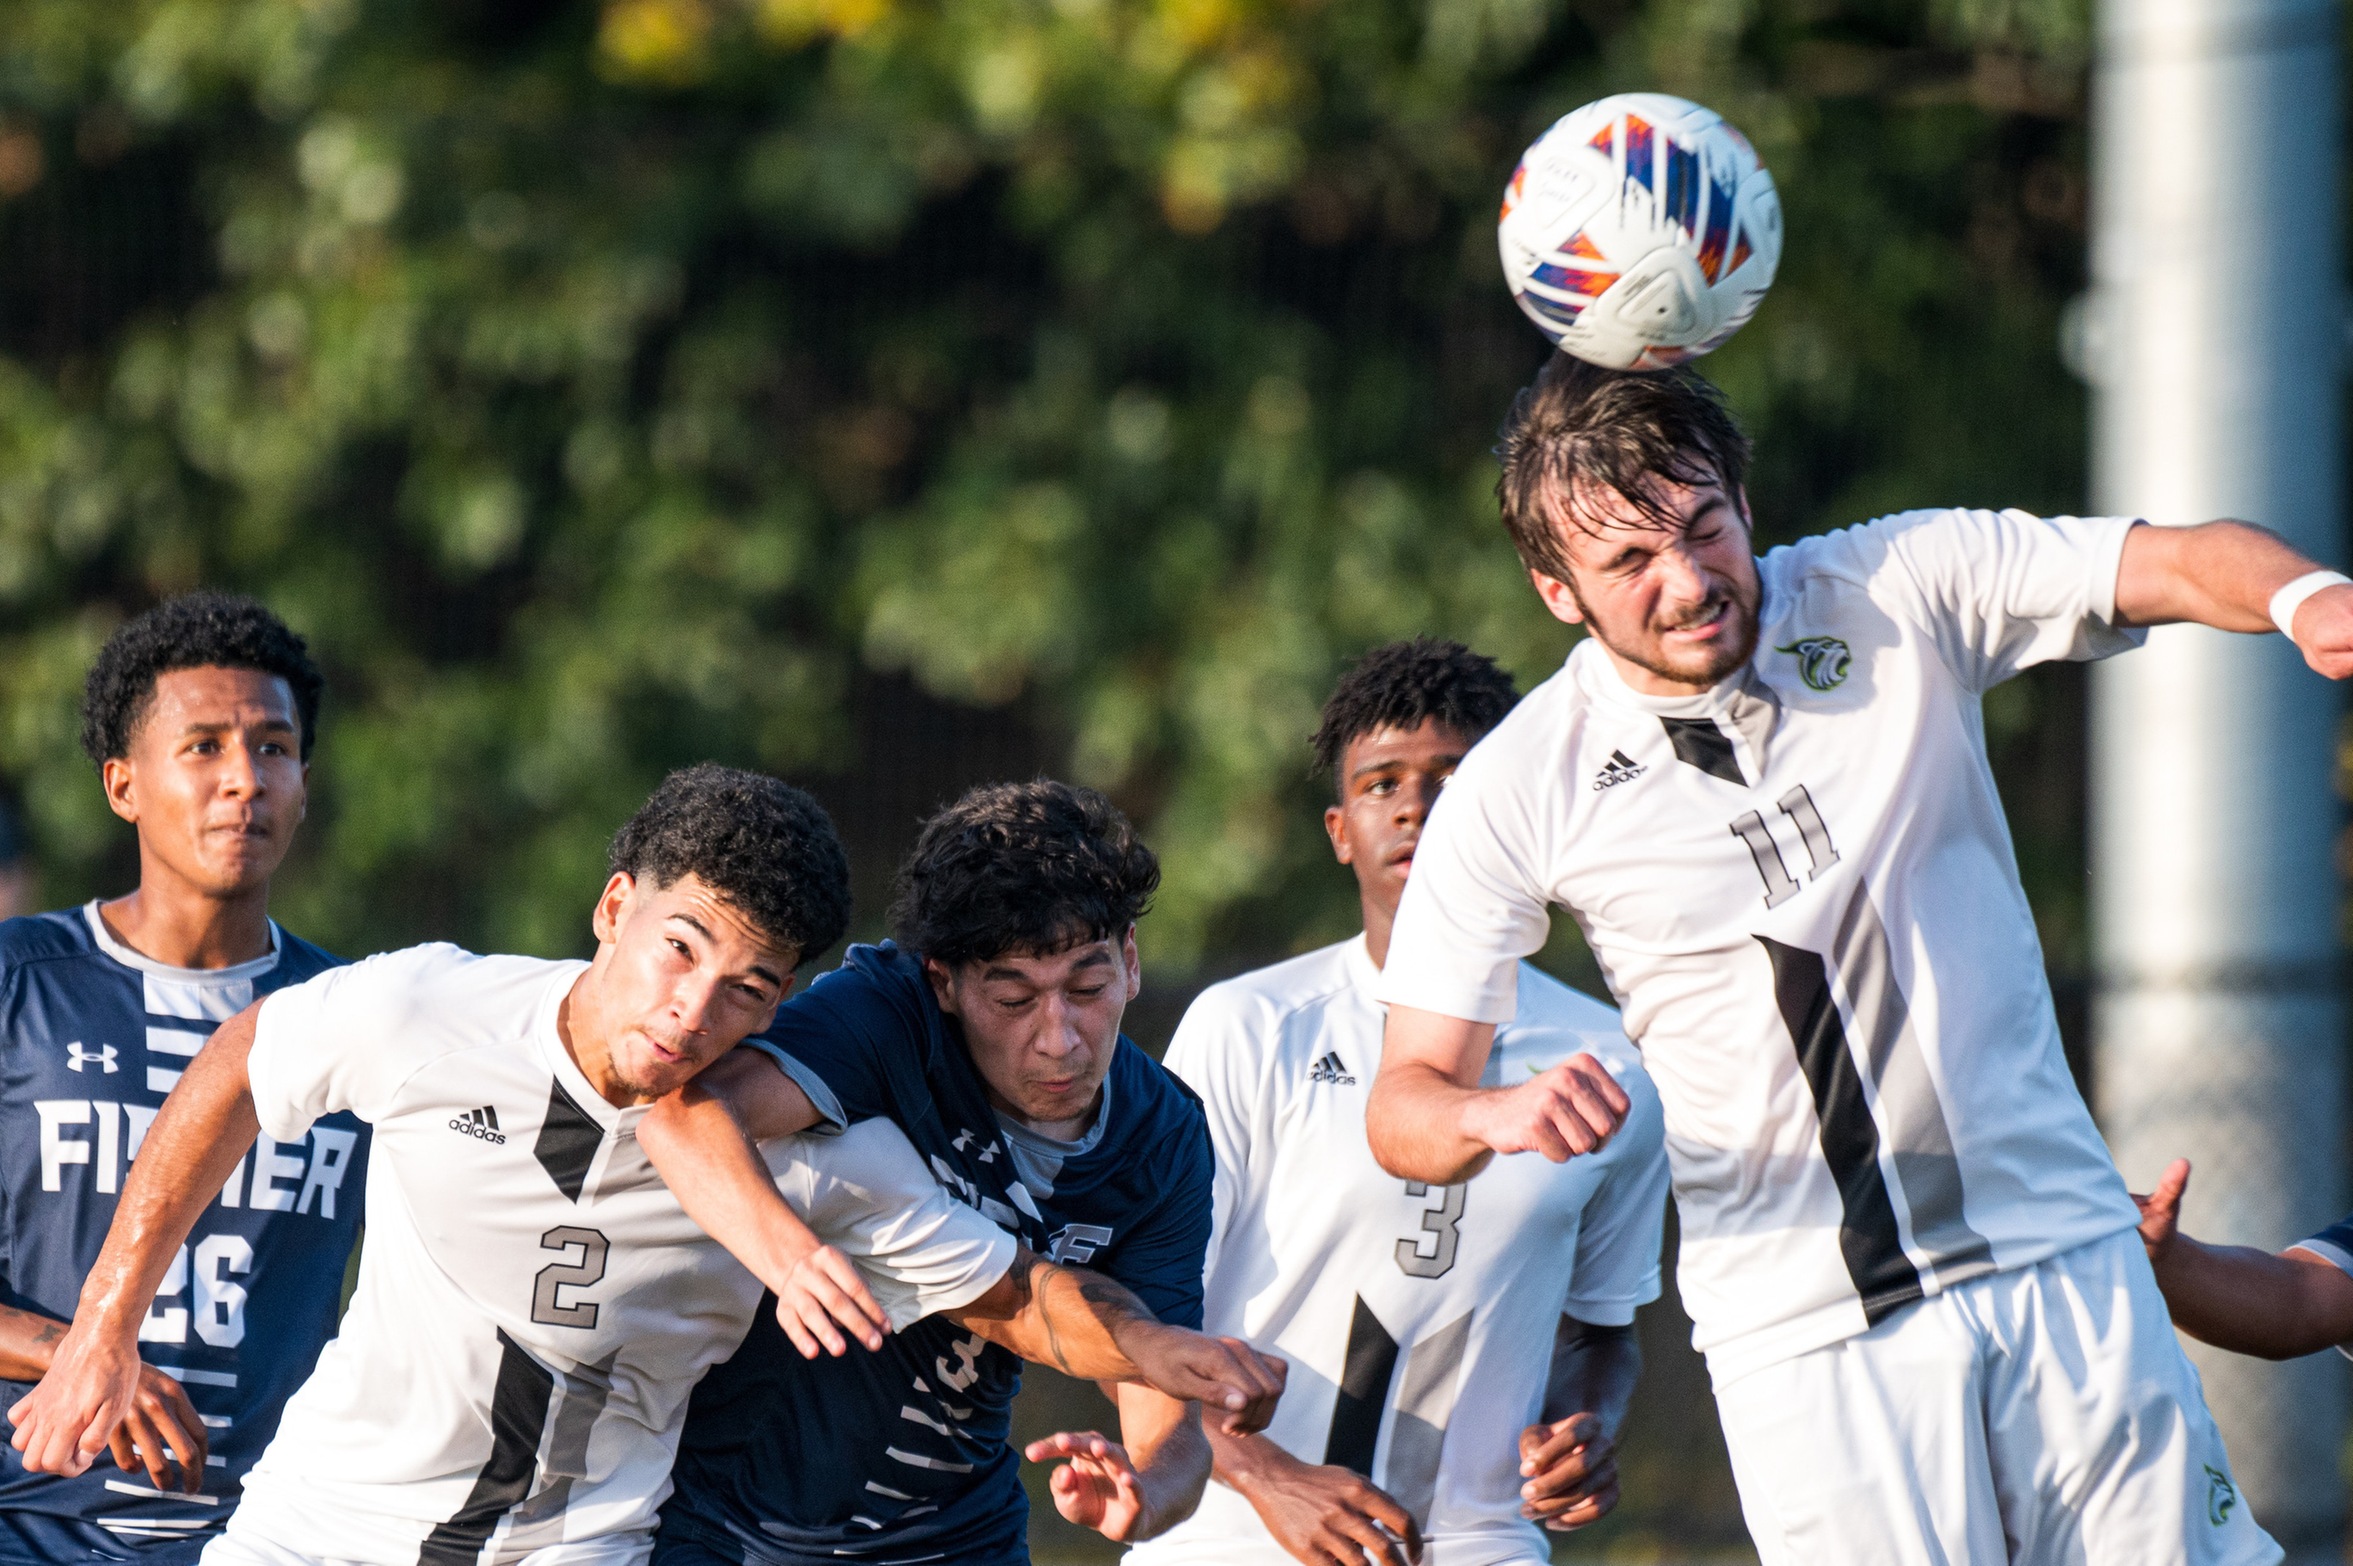 Men's Soccer Snags 1-0 Win Over Fitchburg State